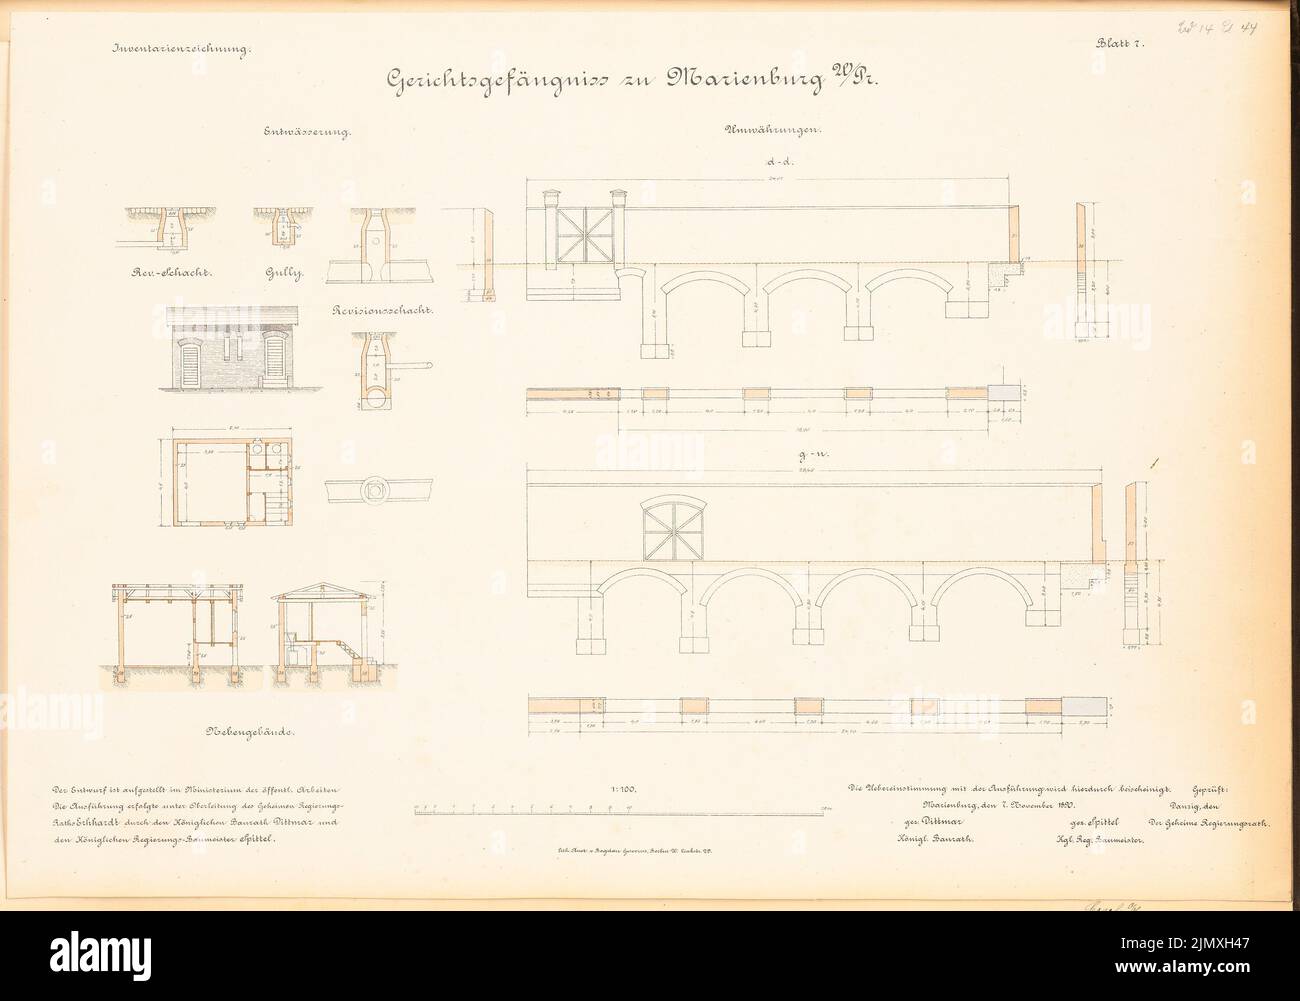 Unknown architect, jurisdiction in Marienburg (approx. 1891): Plan content N.N. detected. Lithograph on paper, 46.9 x 66.9 cm (including scan edges) Stock Photo